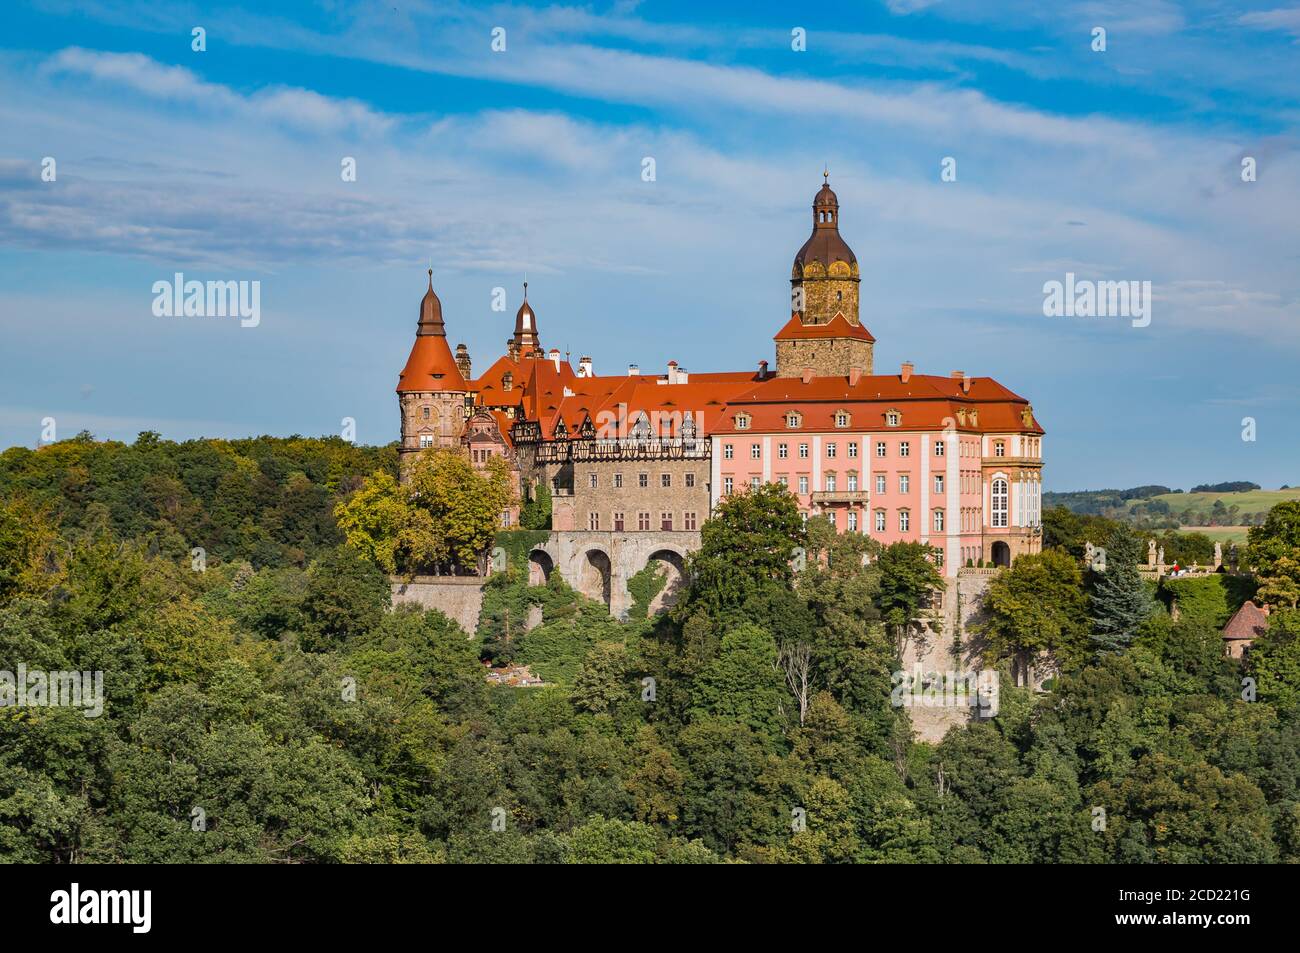 A picture of the Książ Castle as seen from a nearby observation point. Stock Photo